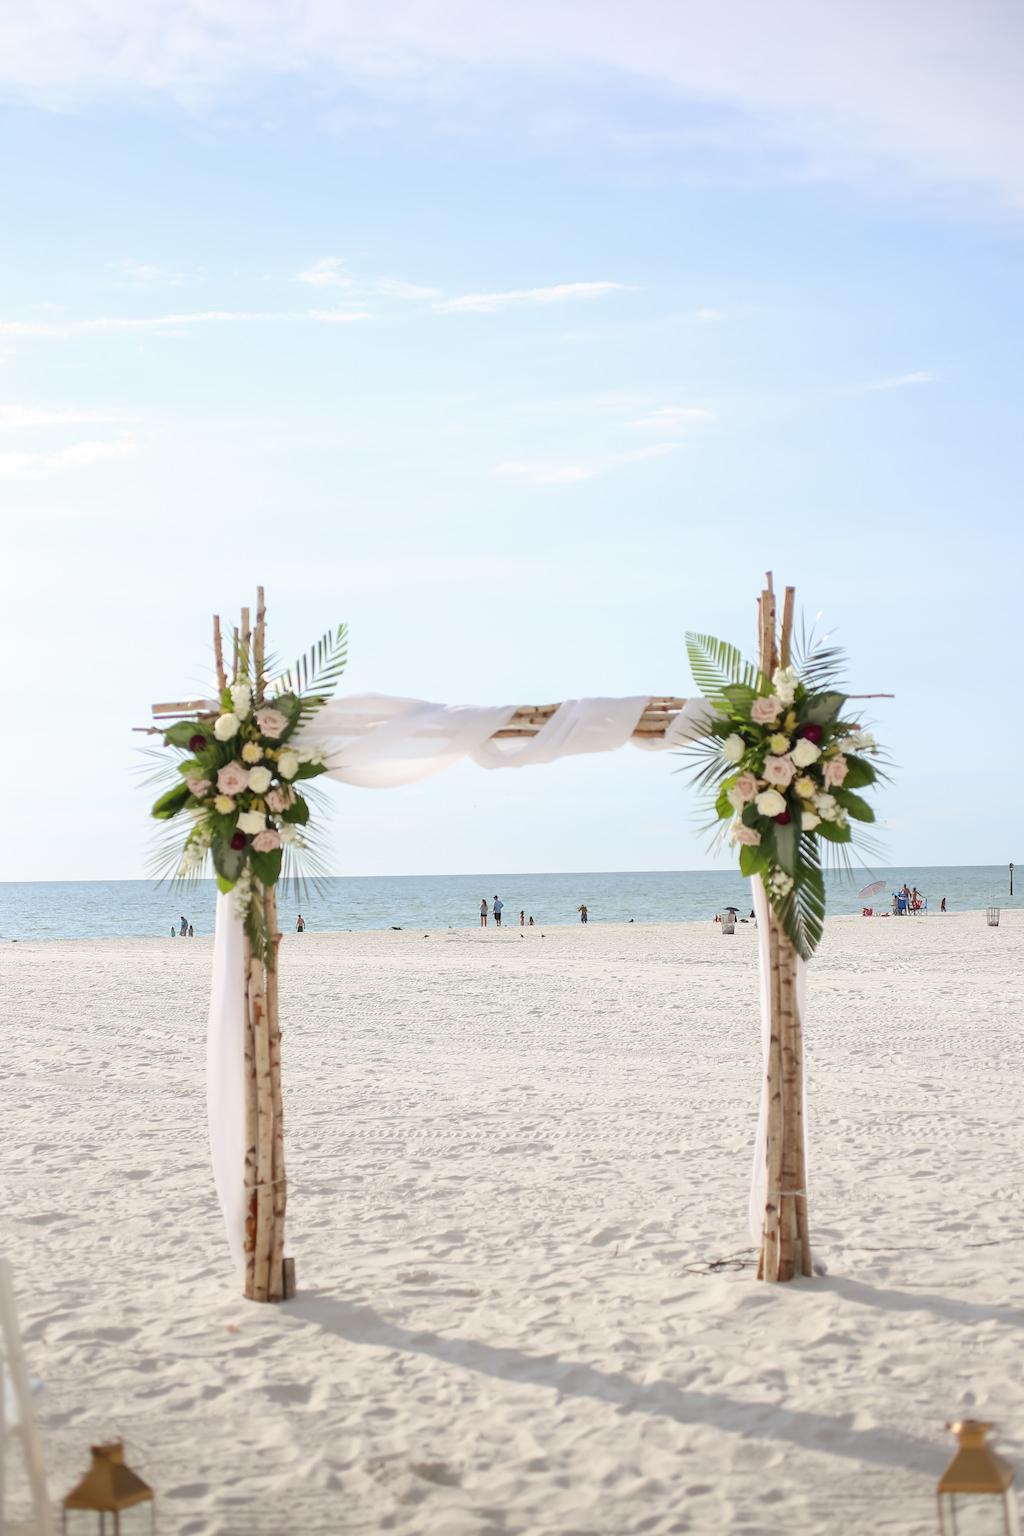 Clearwater Beach Waterfront Wedding Ceremony Decor, Birchwood Arch with White Draping, Blush Pink, White and Green Palm Tree Leaves | Tampa Bay Wedding Photographer Lifelong Photography Studios